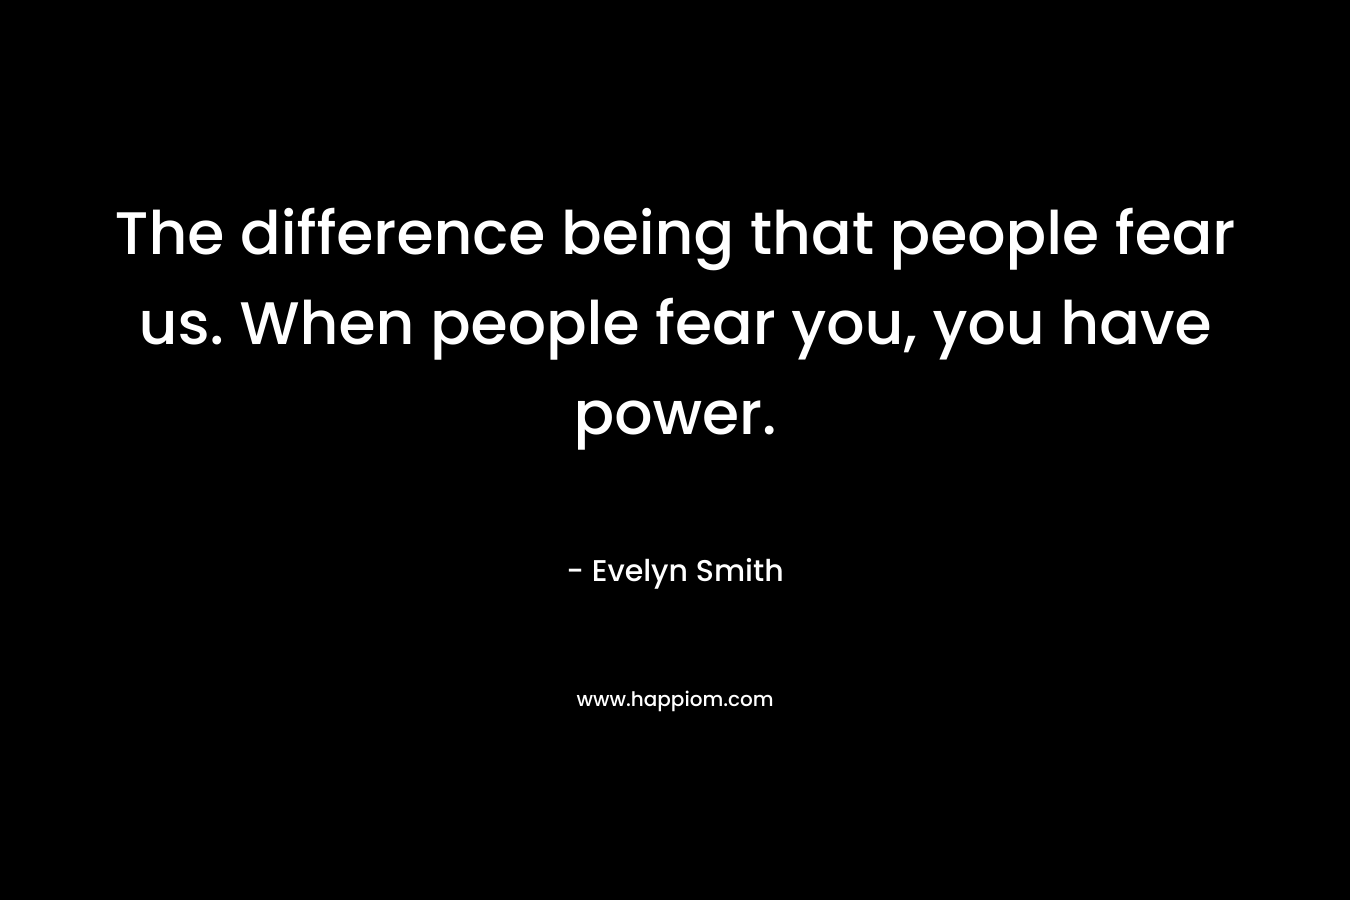 The difference being that people fear us. When people fear you, you have power.